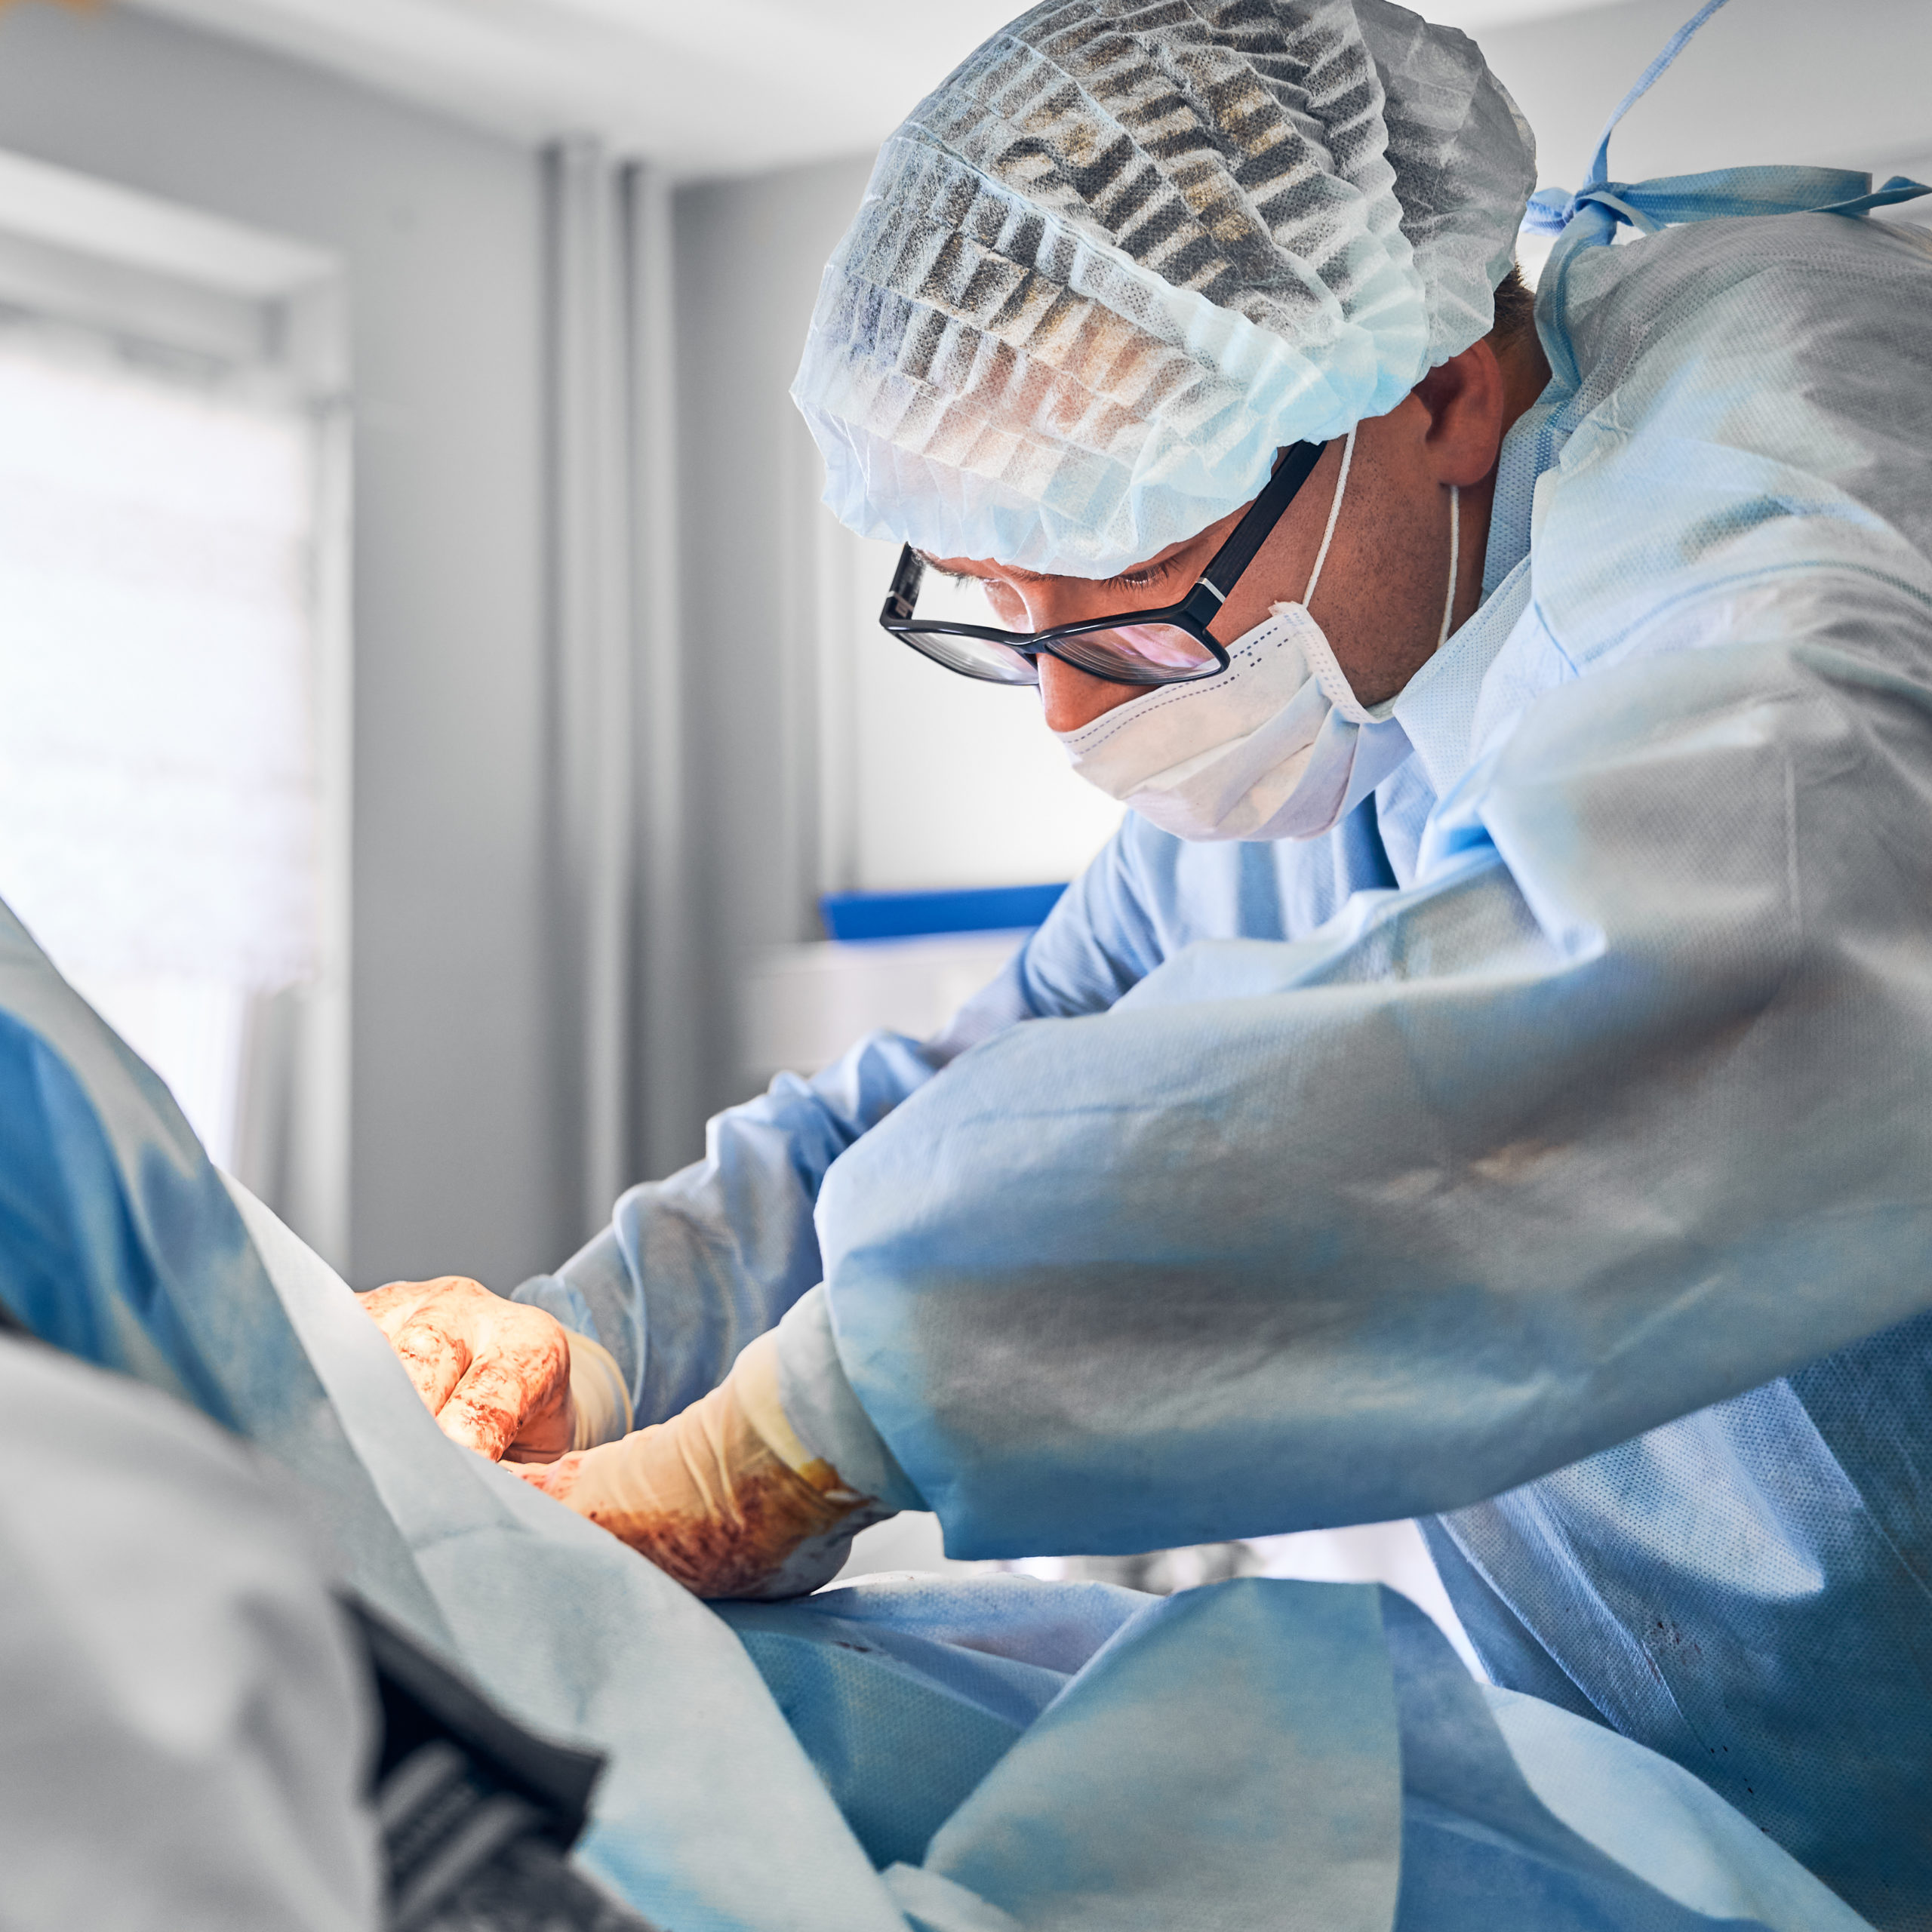 Male doctor doing abdominoplasty surgery in operating room